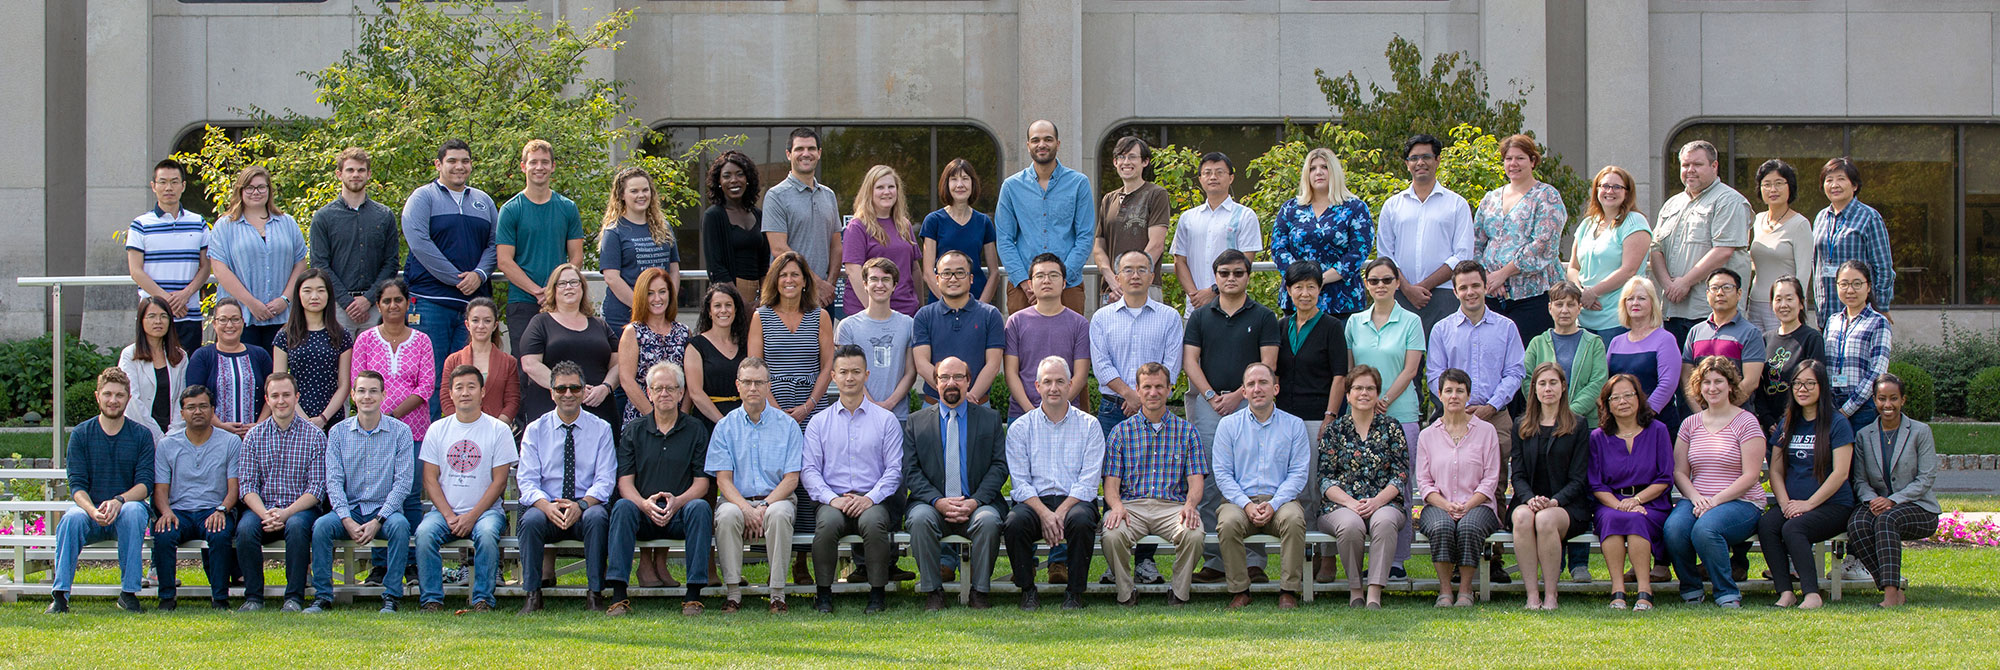 The faculty, staff, postdocs and students of the Department of Cellular and Molecular Physiology at Penn State College of Medicine are pictured in September 2019.